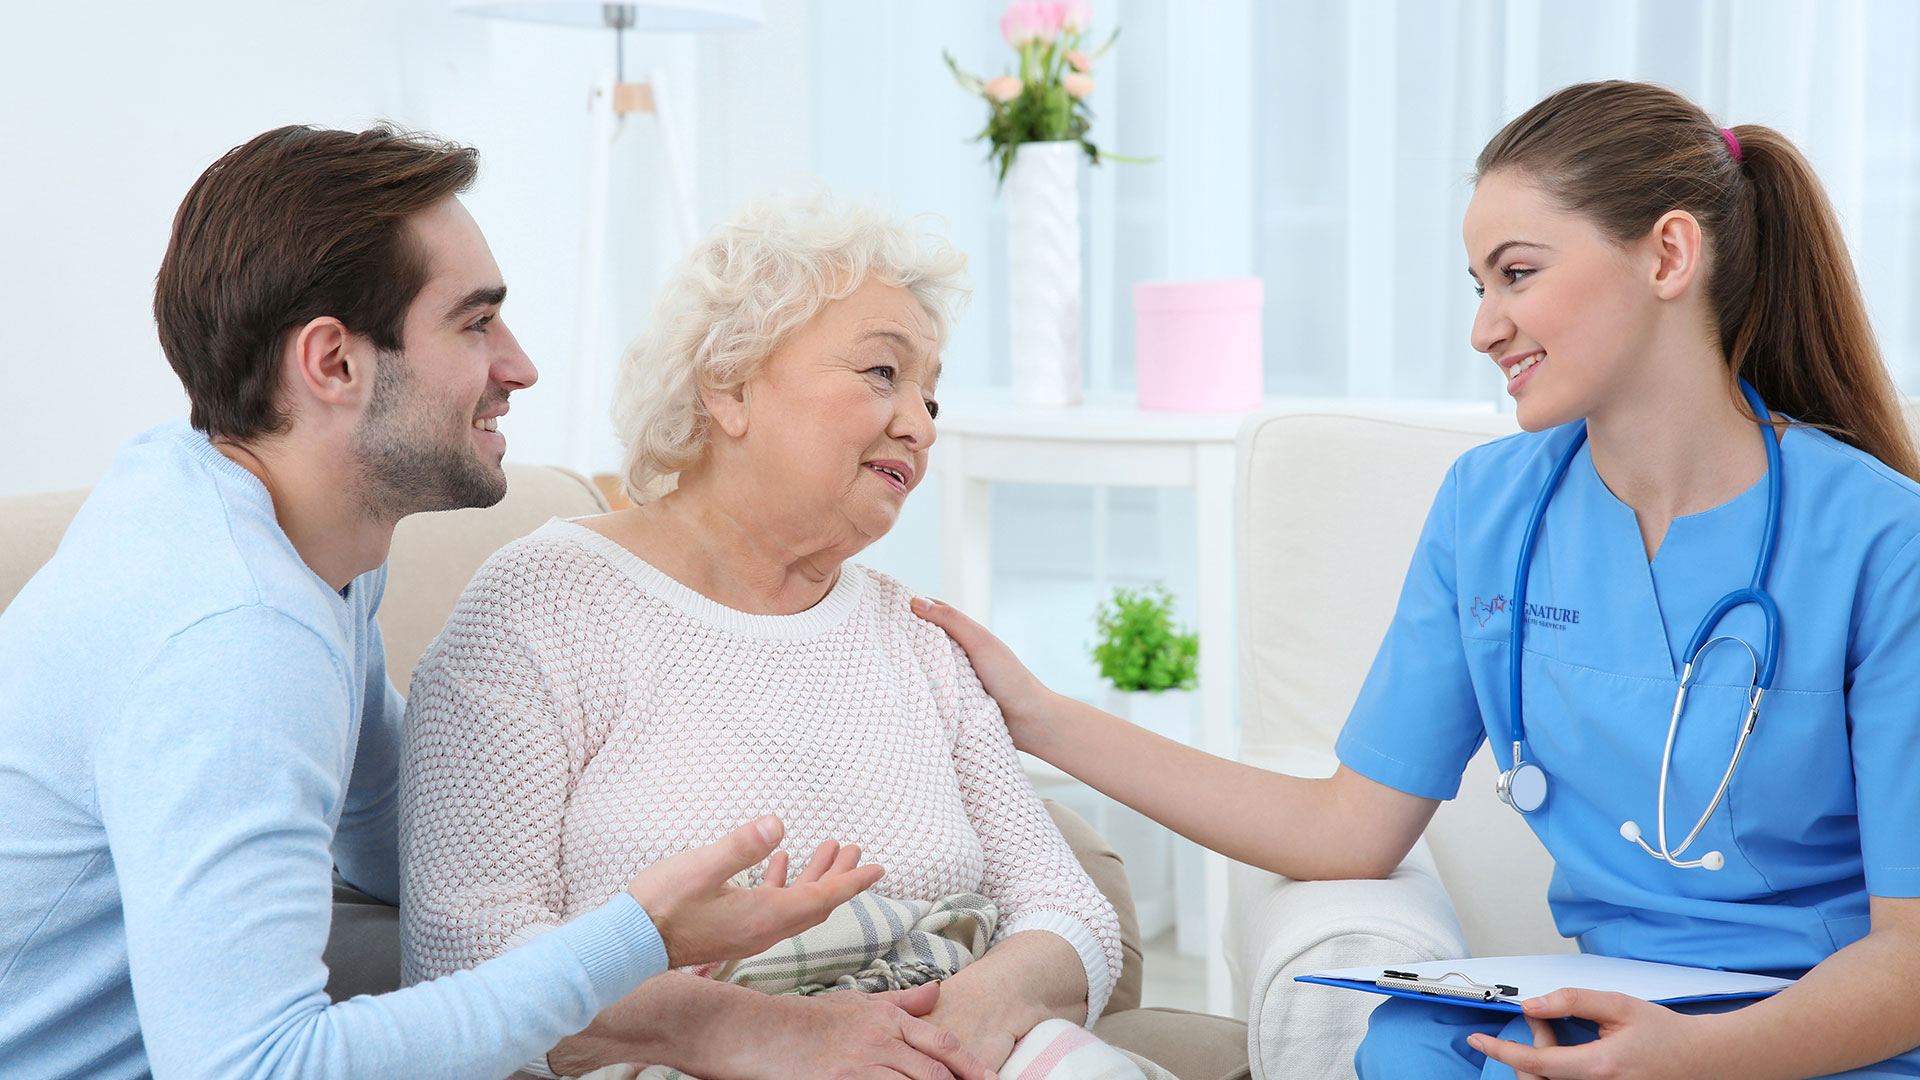 Nurse talking to patient and her family